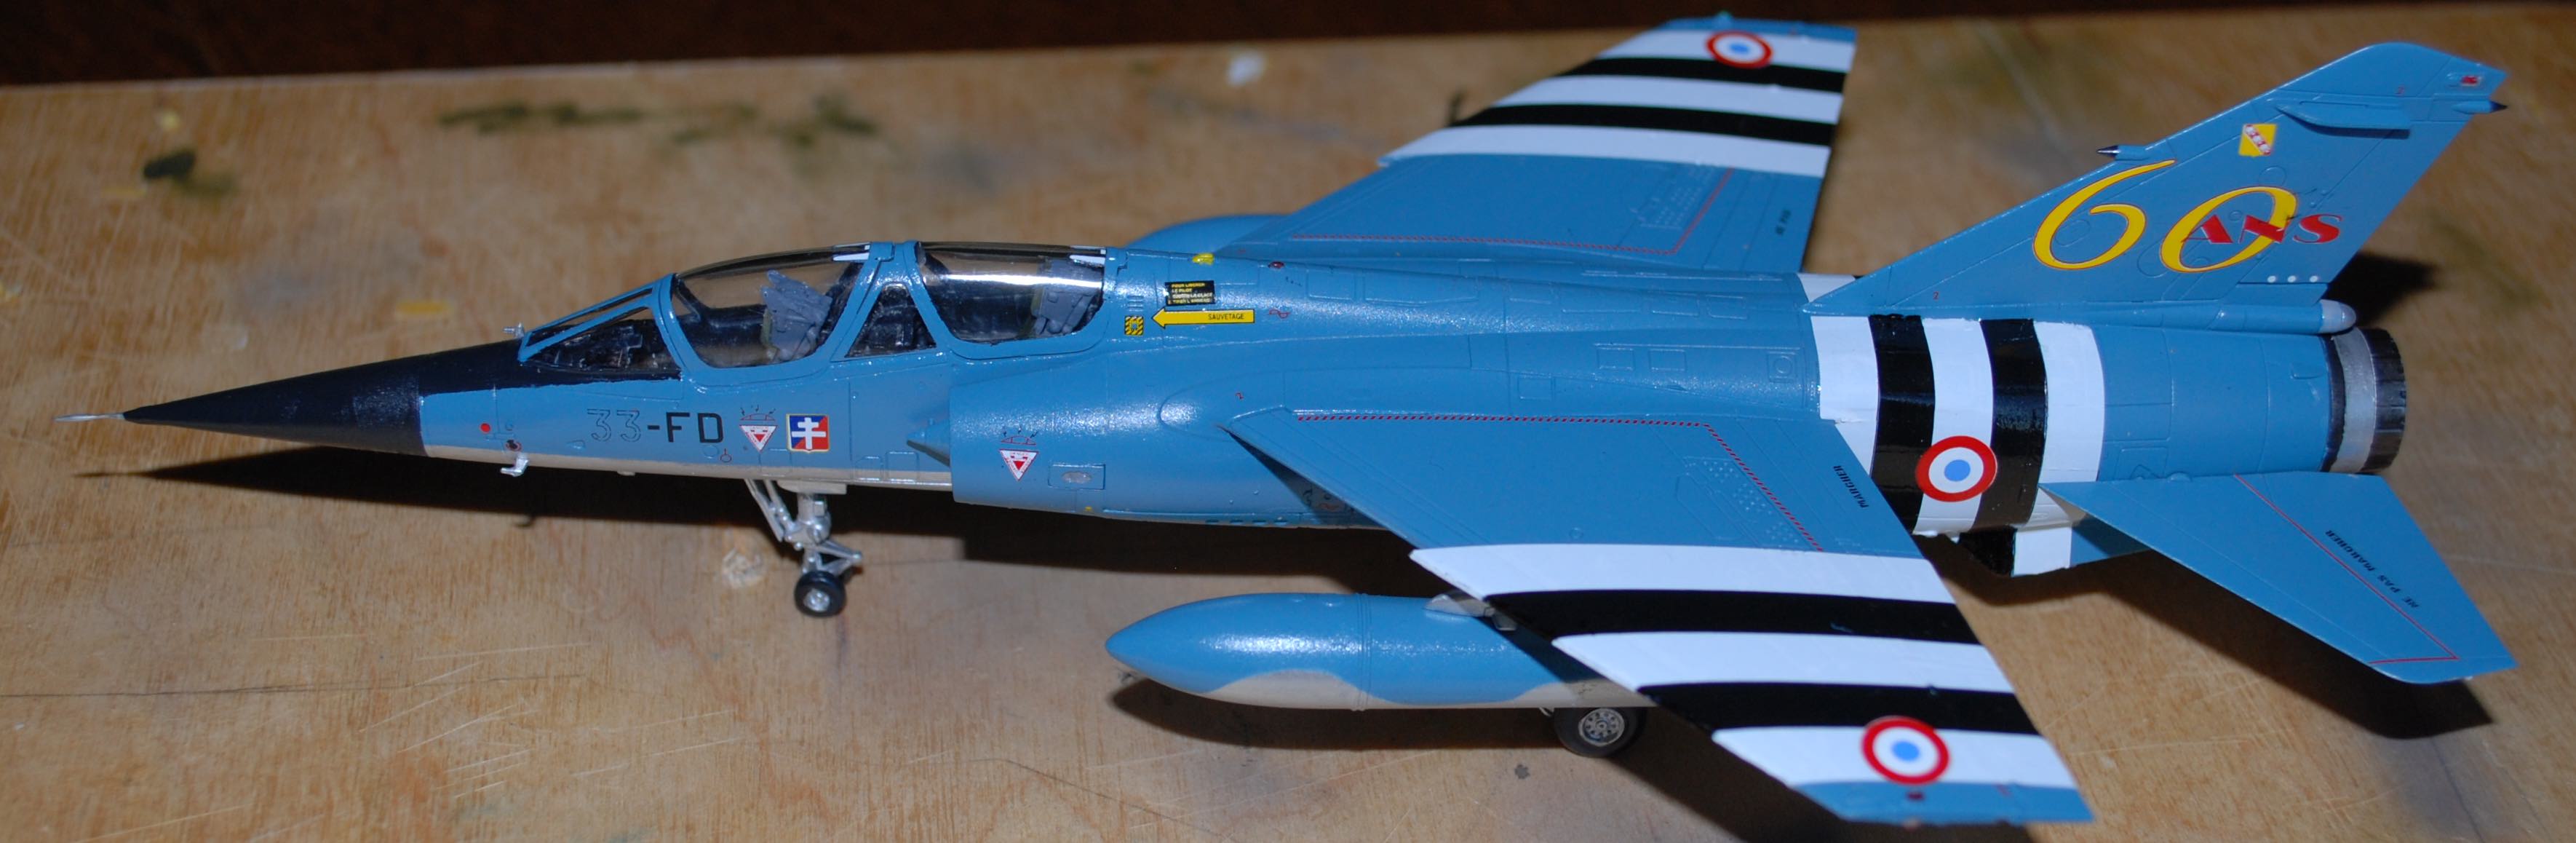 Mirage F1B, Special Hobby, 1/72 17061212342919947815089901